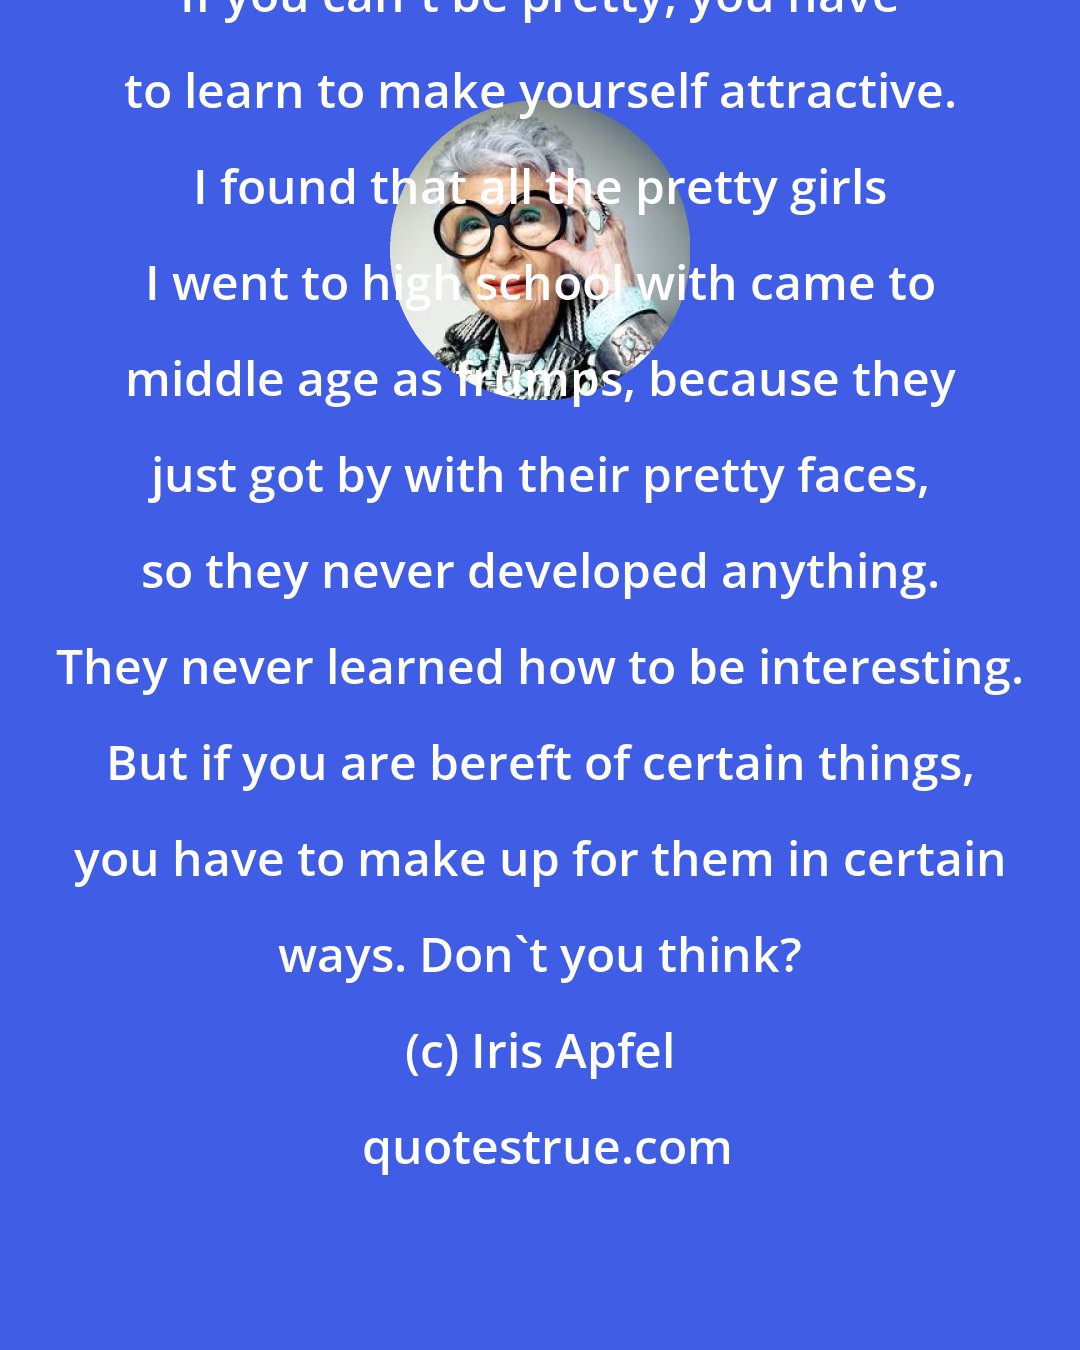 Iris Apfel: If you can't be pretty, you have to learn to make yourself attractive. I found that all the pretty girls I went to high school with came to middle age as frumps, because they just got by with their pretty faces, so they never developed anything. They never learned how to be interesting. But if you are bereft of certain things, you have to make up for them in certain ways. Don't you think?